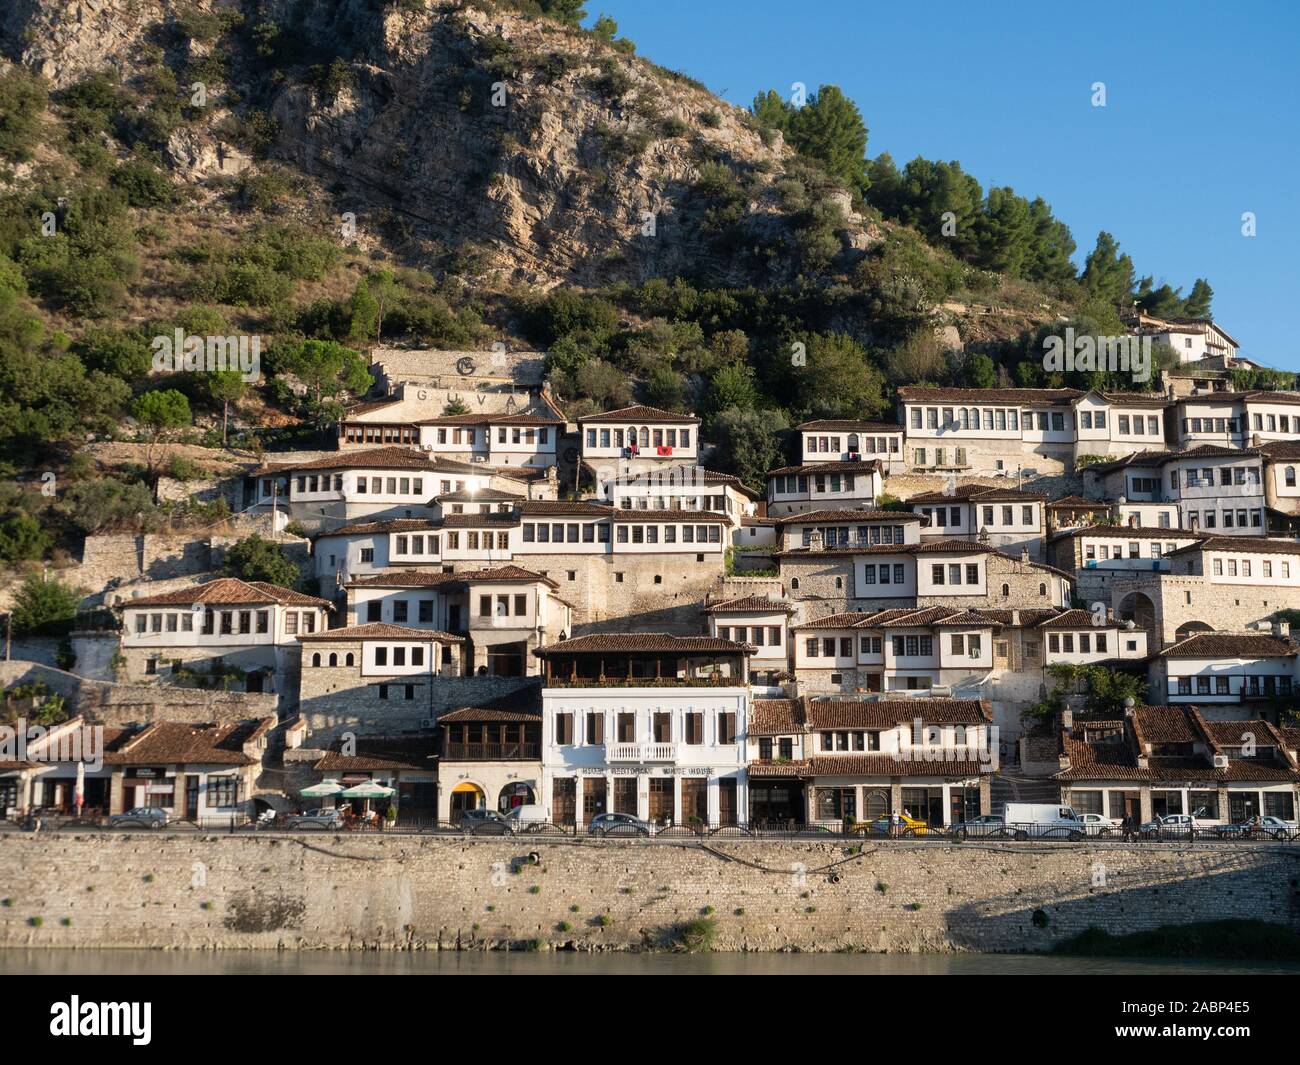 Berat, Albania - September 27, 2019: Ottoman houses with multiple windows built on a hillside in Berat, Albania with the River Osum and businesses in Stock Photo